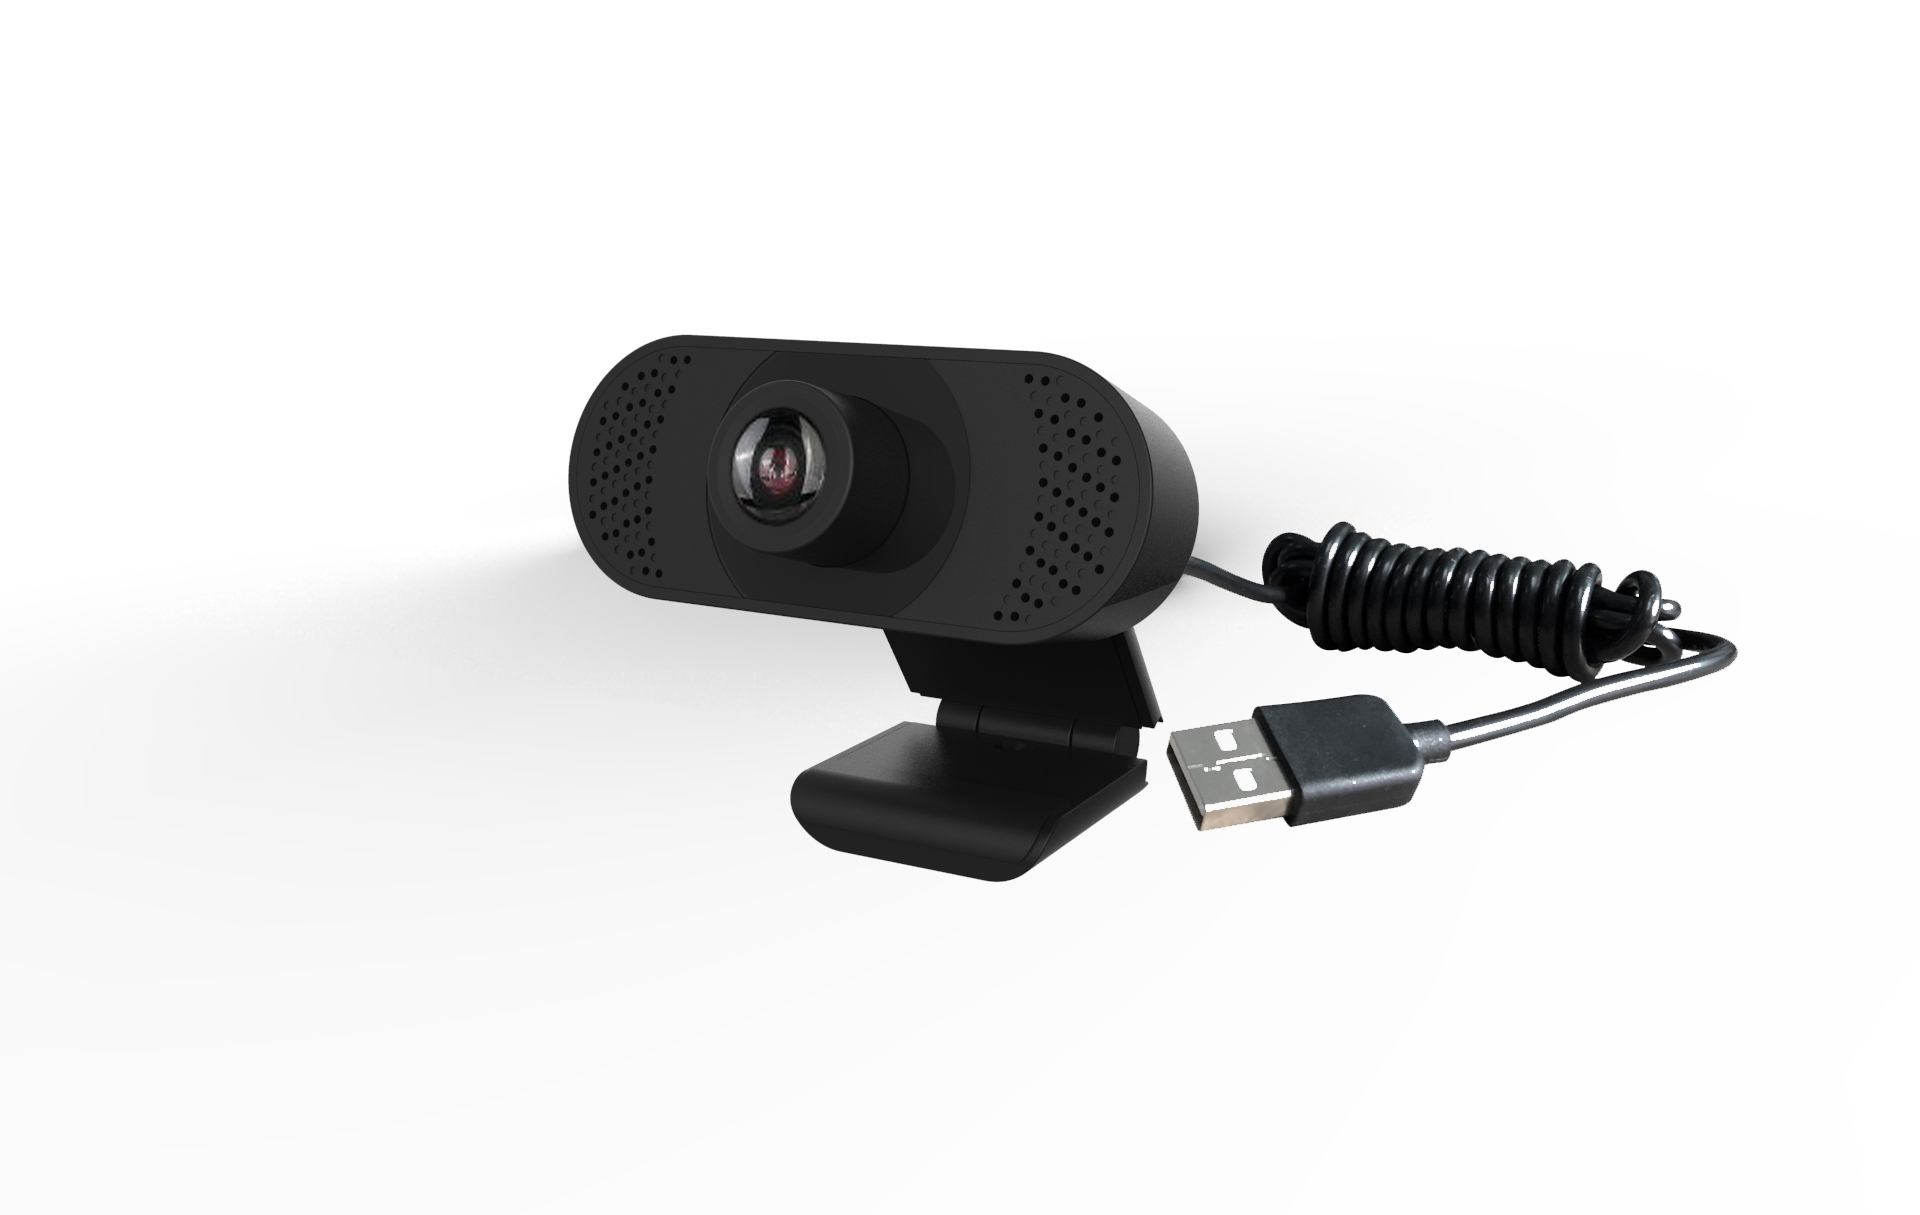 How about this USB computer camera?